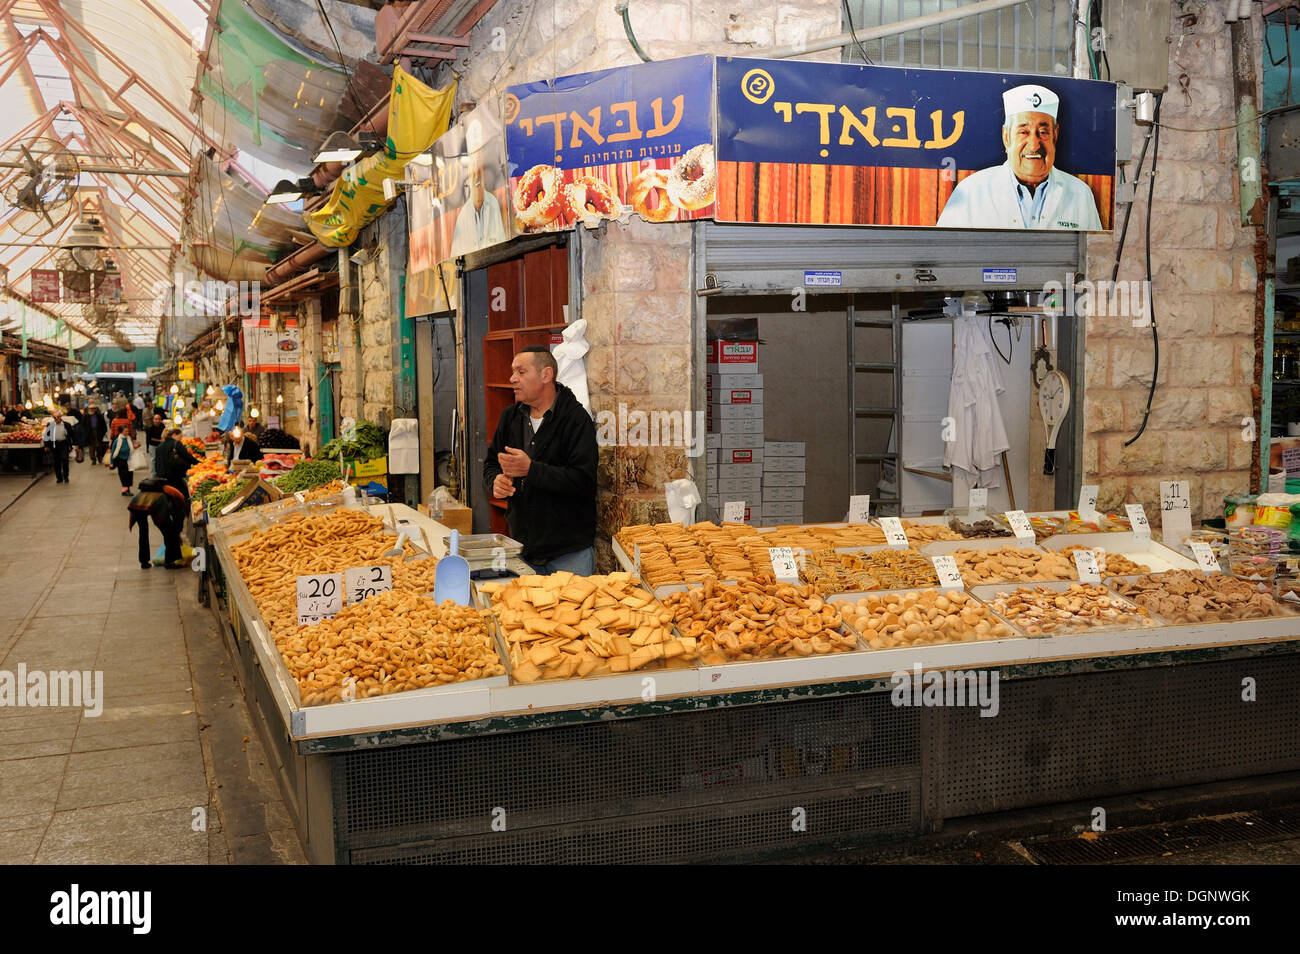 Jewish vendor offering a variety of baked goods for sale on a stall at the Jewish Mahane Yehuda market, Jaffa Road, Jerusalem Stock Photo